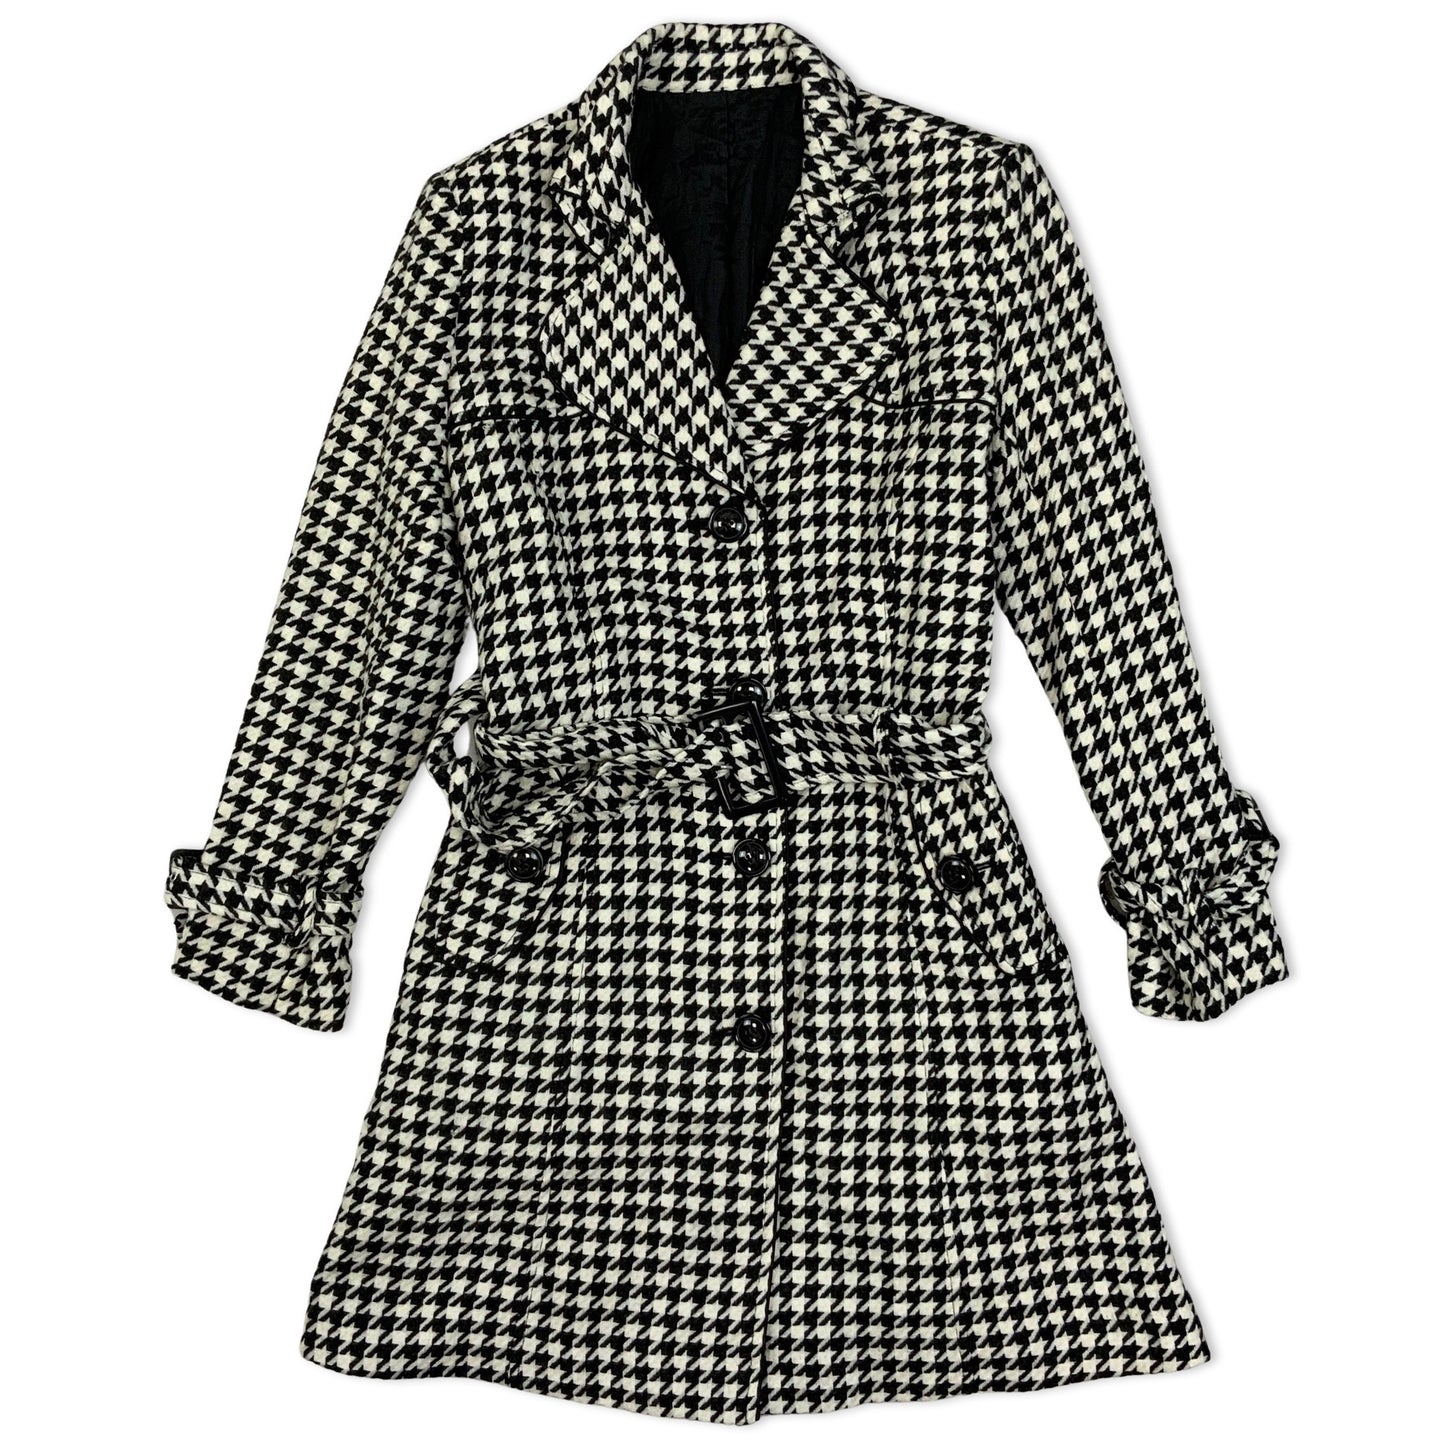 Vintage 90s Black and White Houndstooth check Belted Ladies' Coat 12